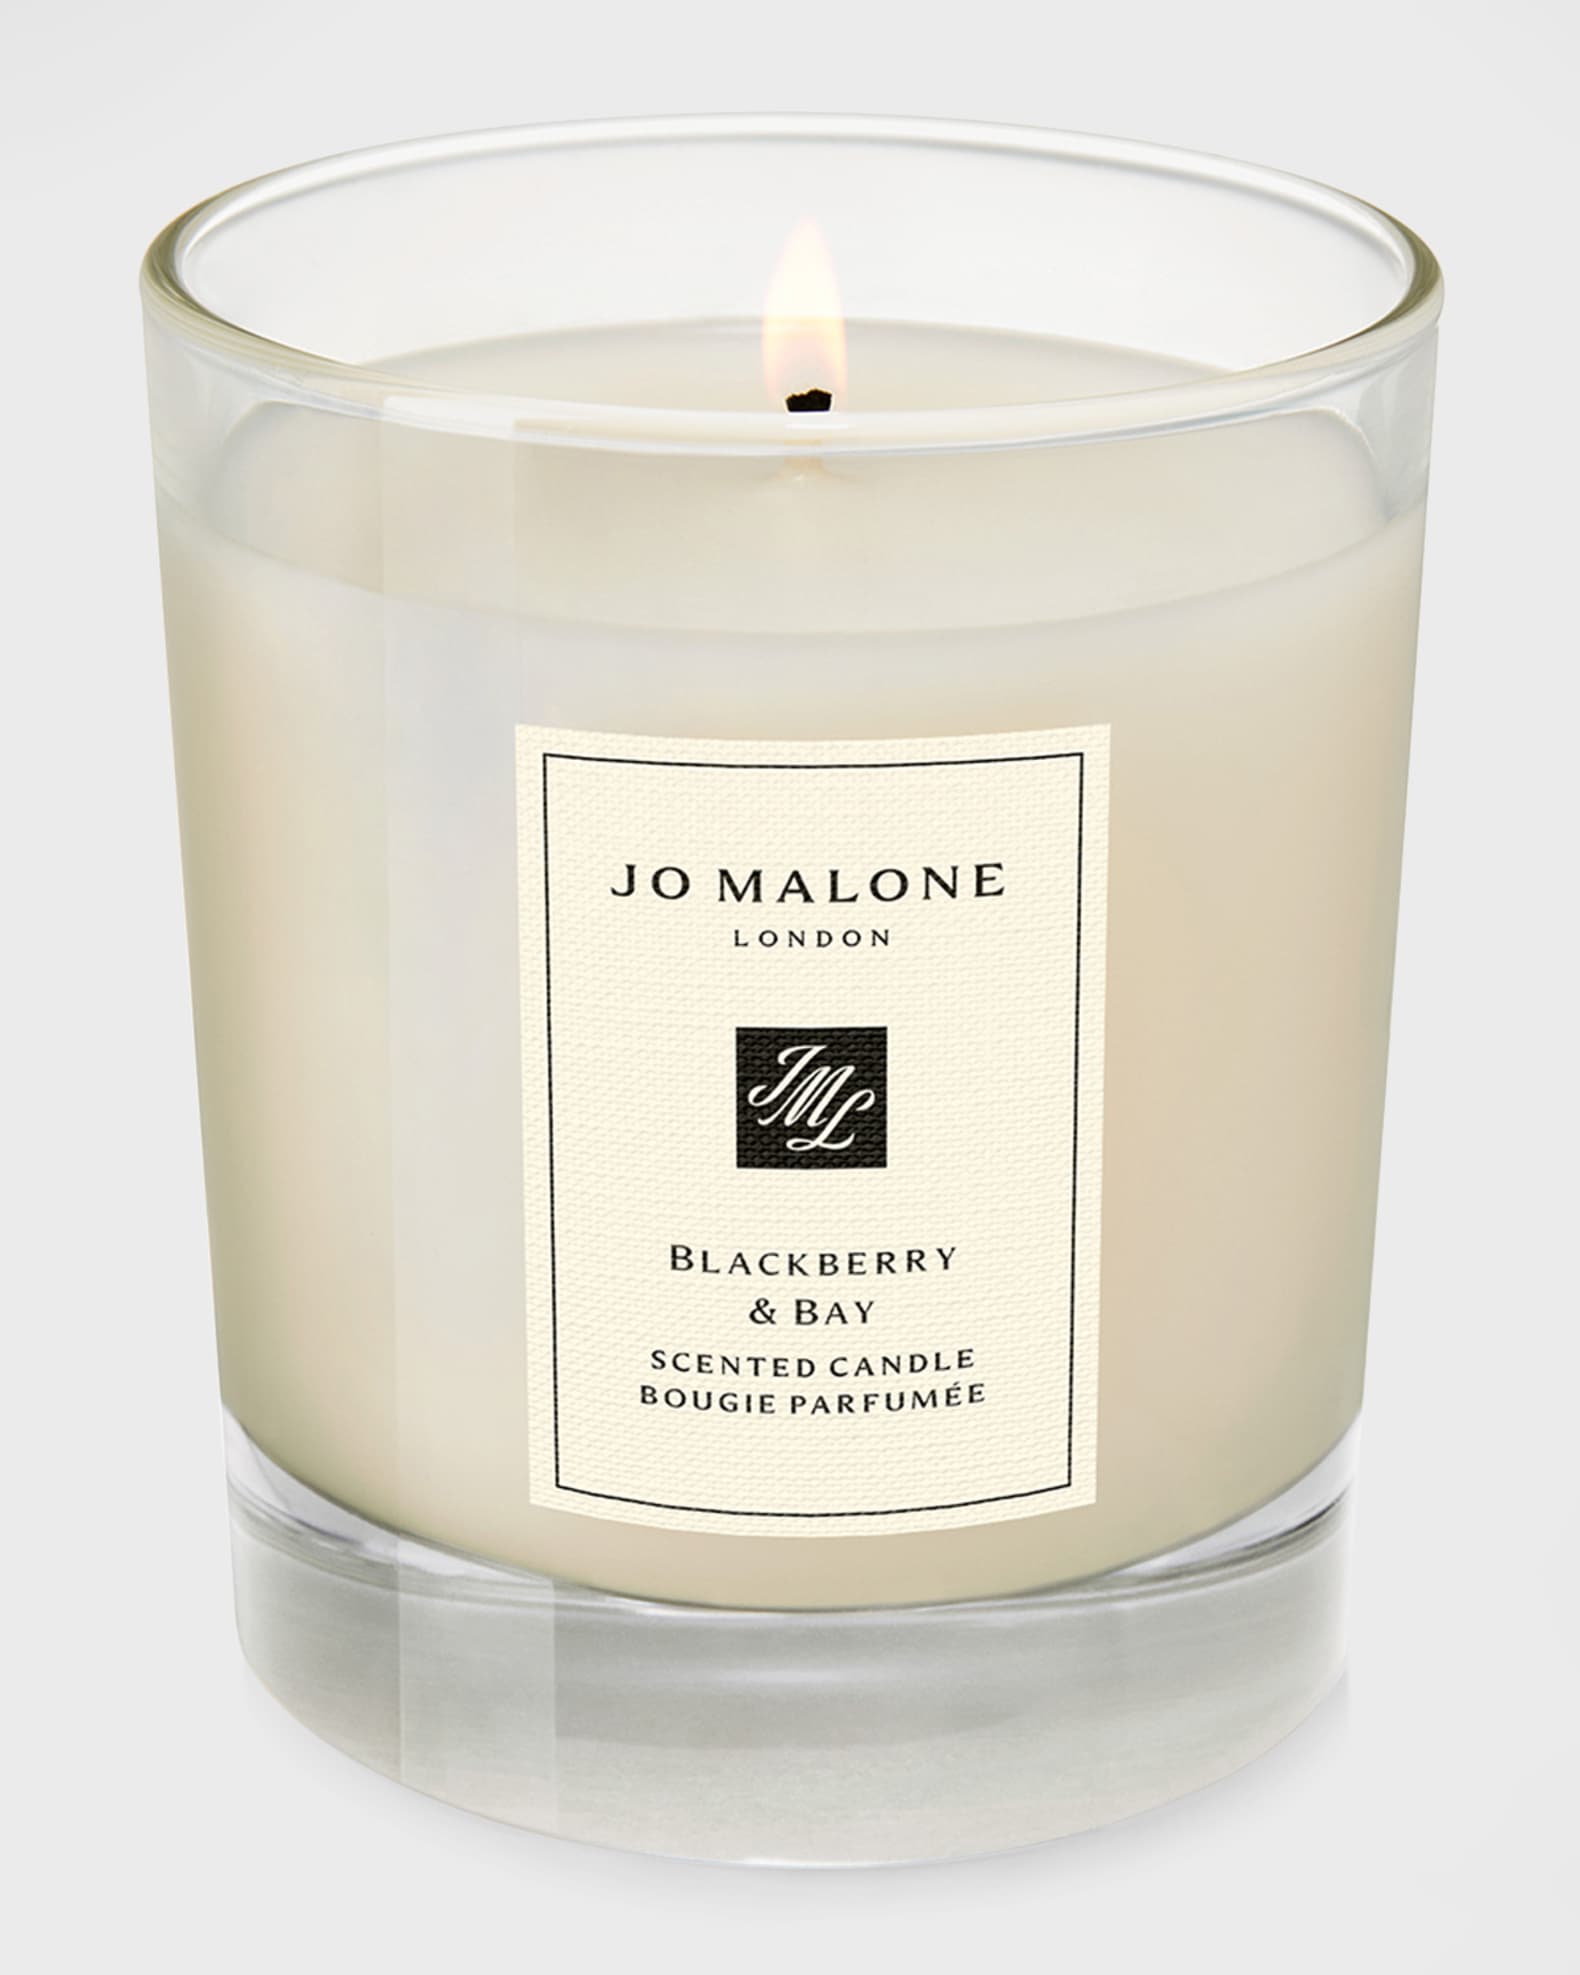 Jo Malone London Blackberry & Bay Scented Candle | Neiman Marcus